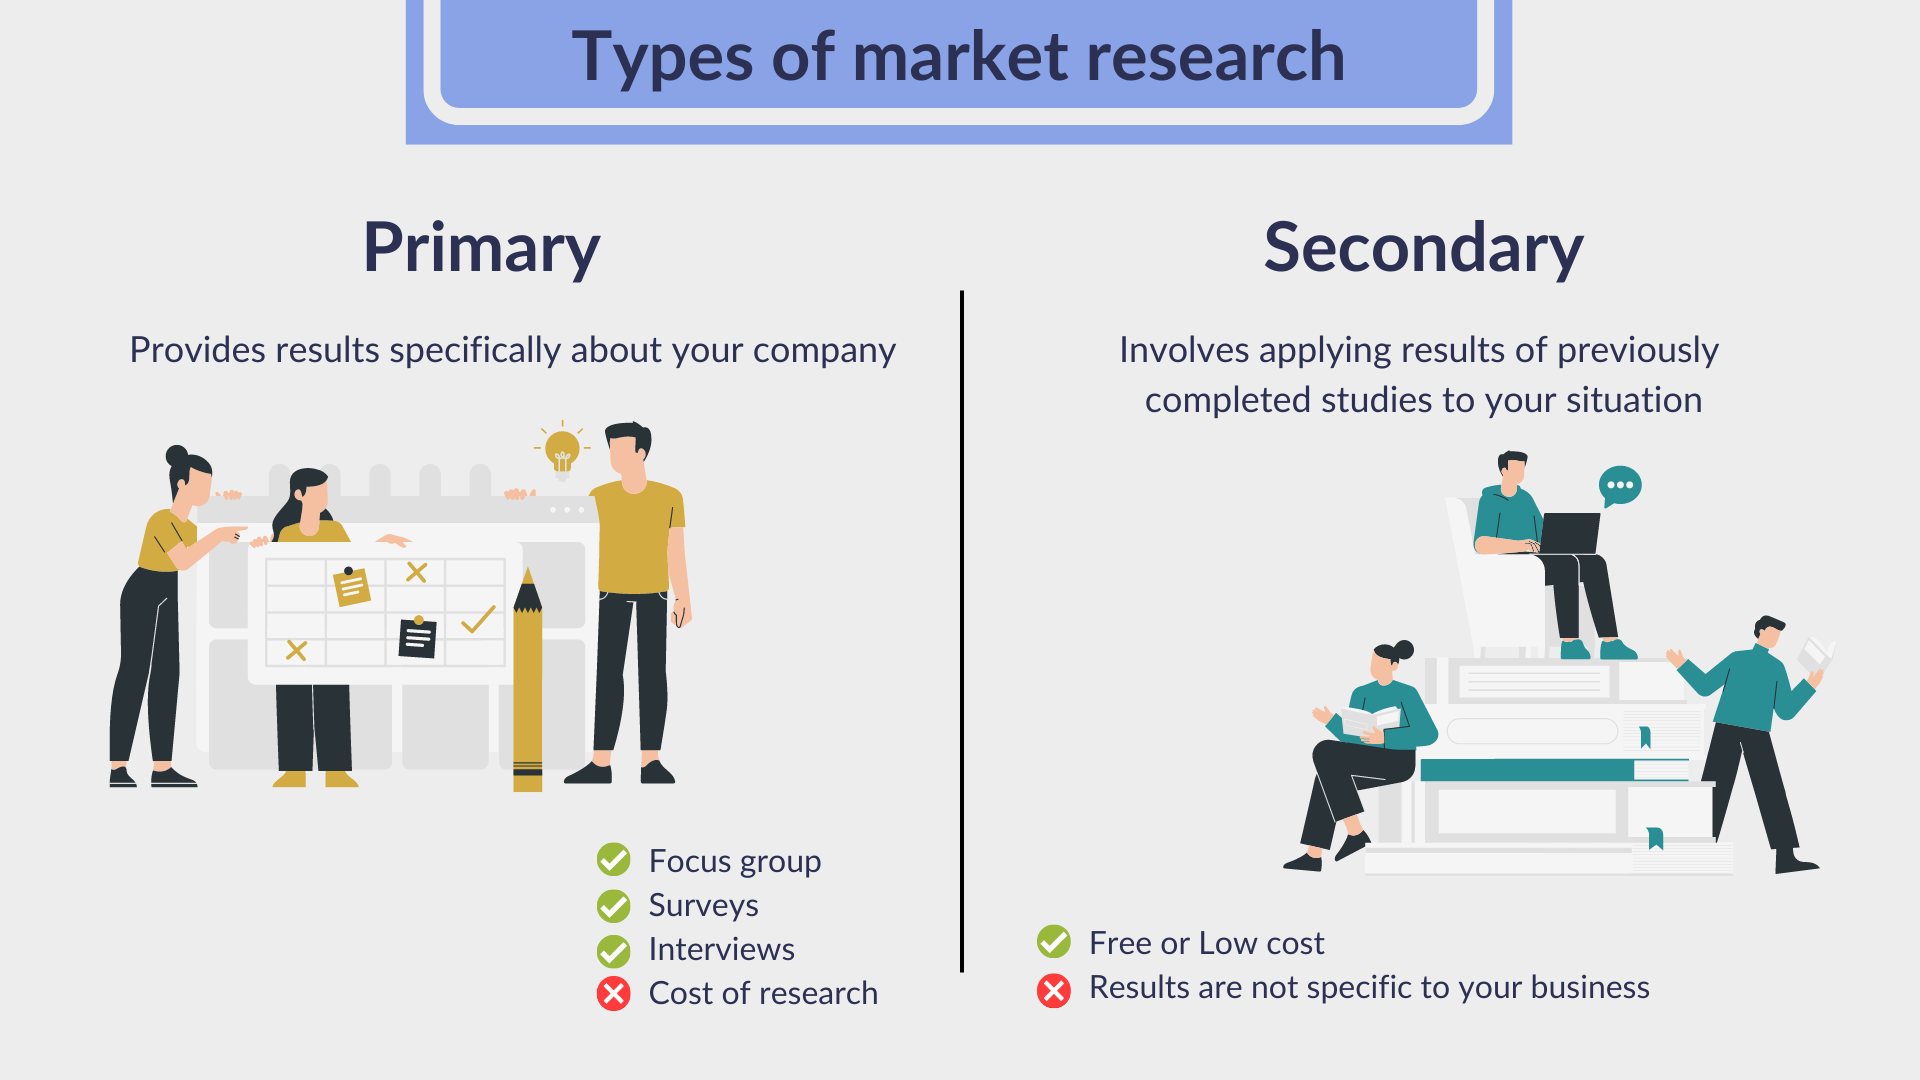 Types of market research